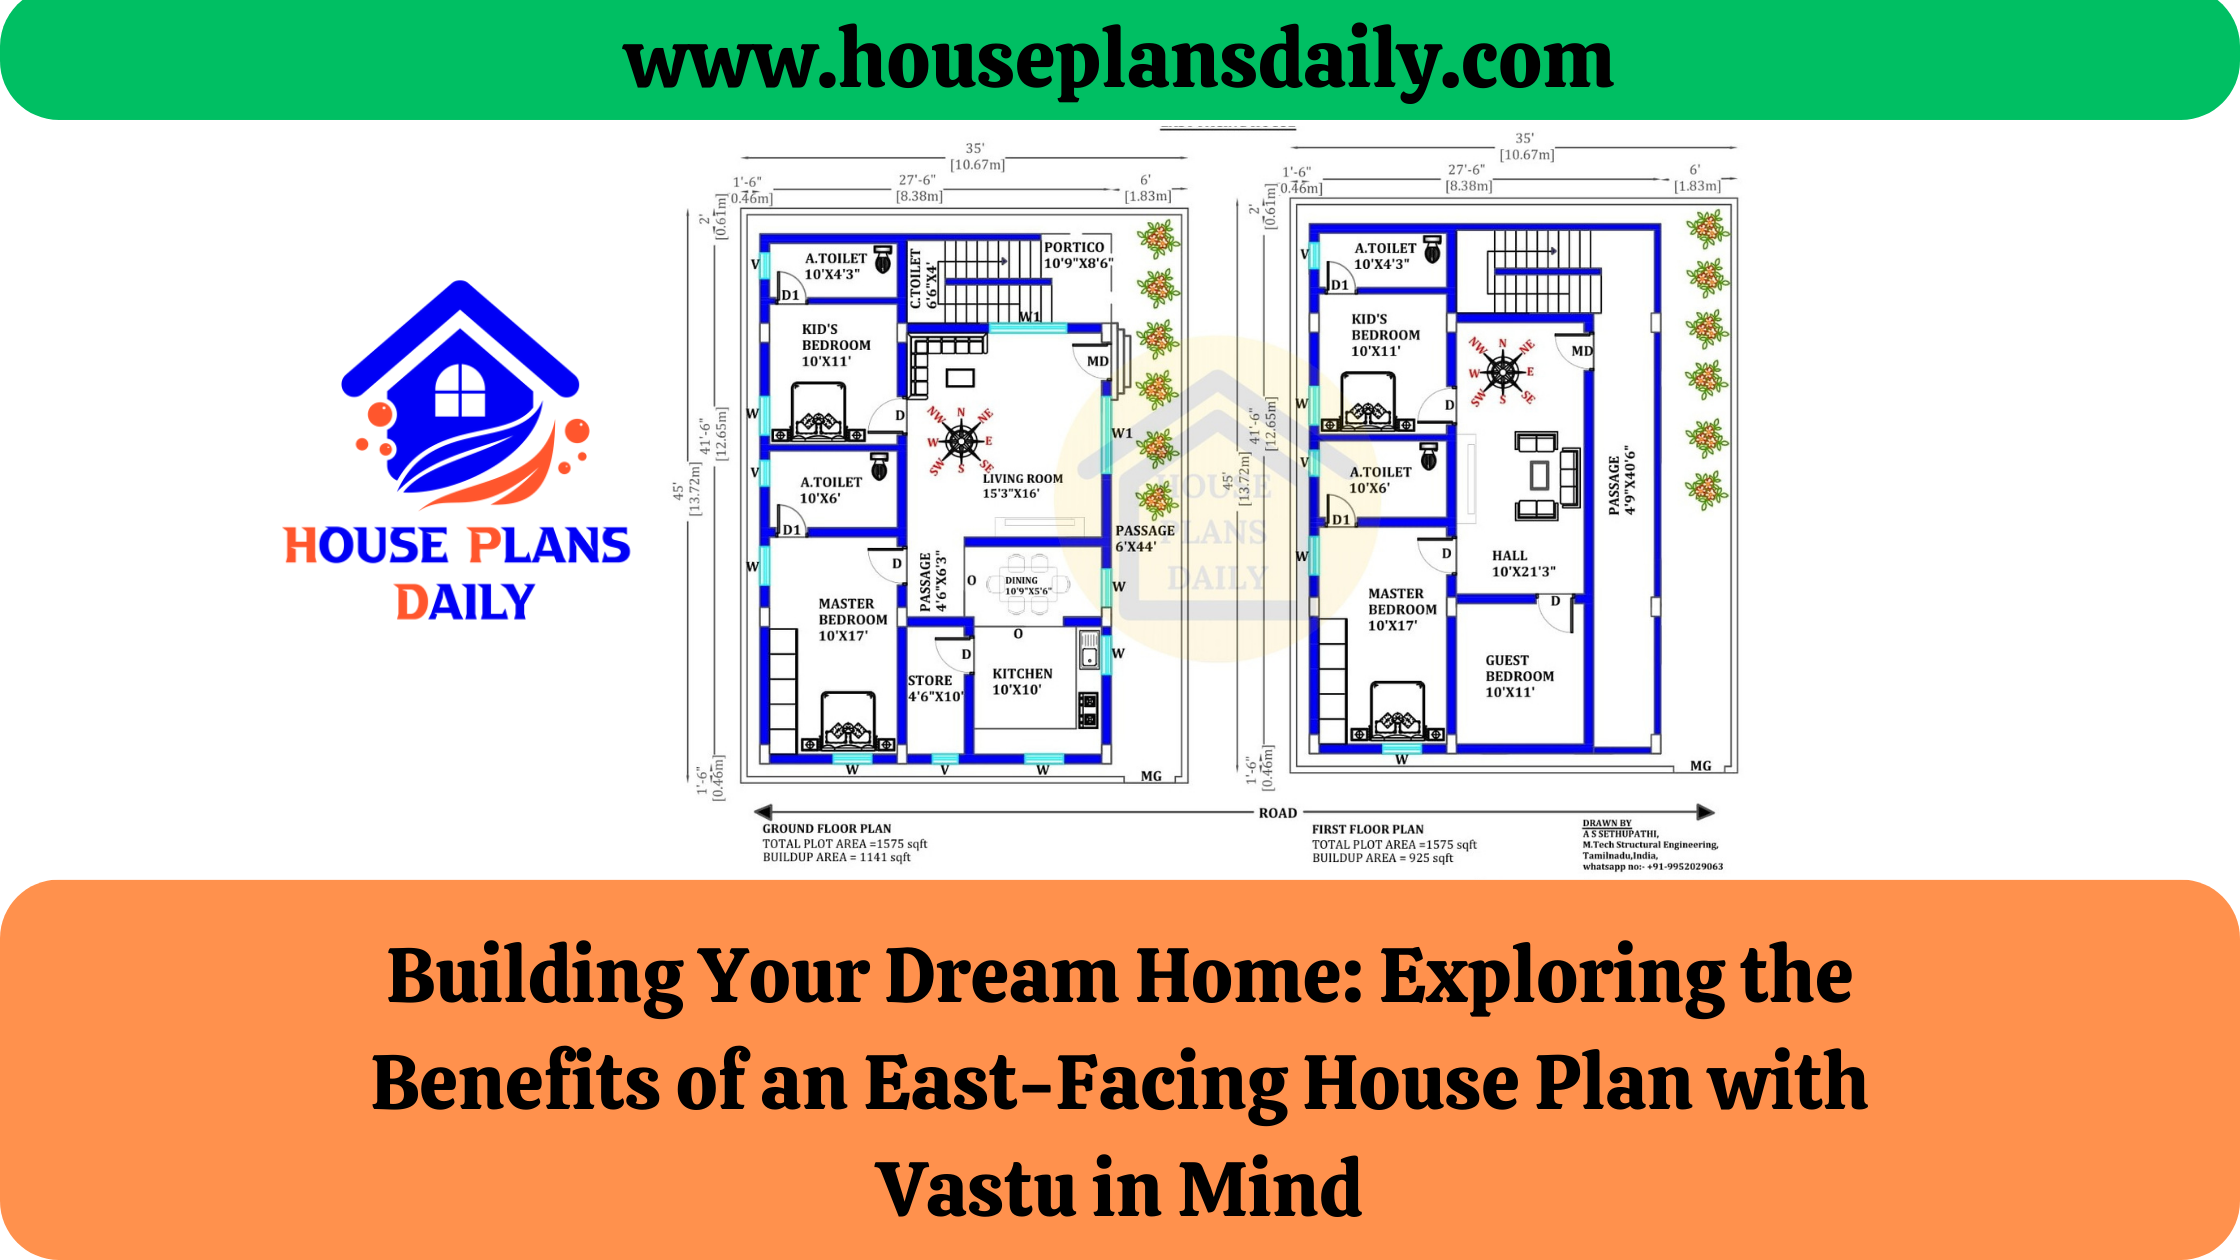 Building Your Dream Home: Exploring the Benefits of an East-Facing House Plan with Vastu